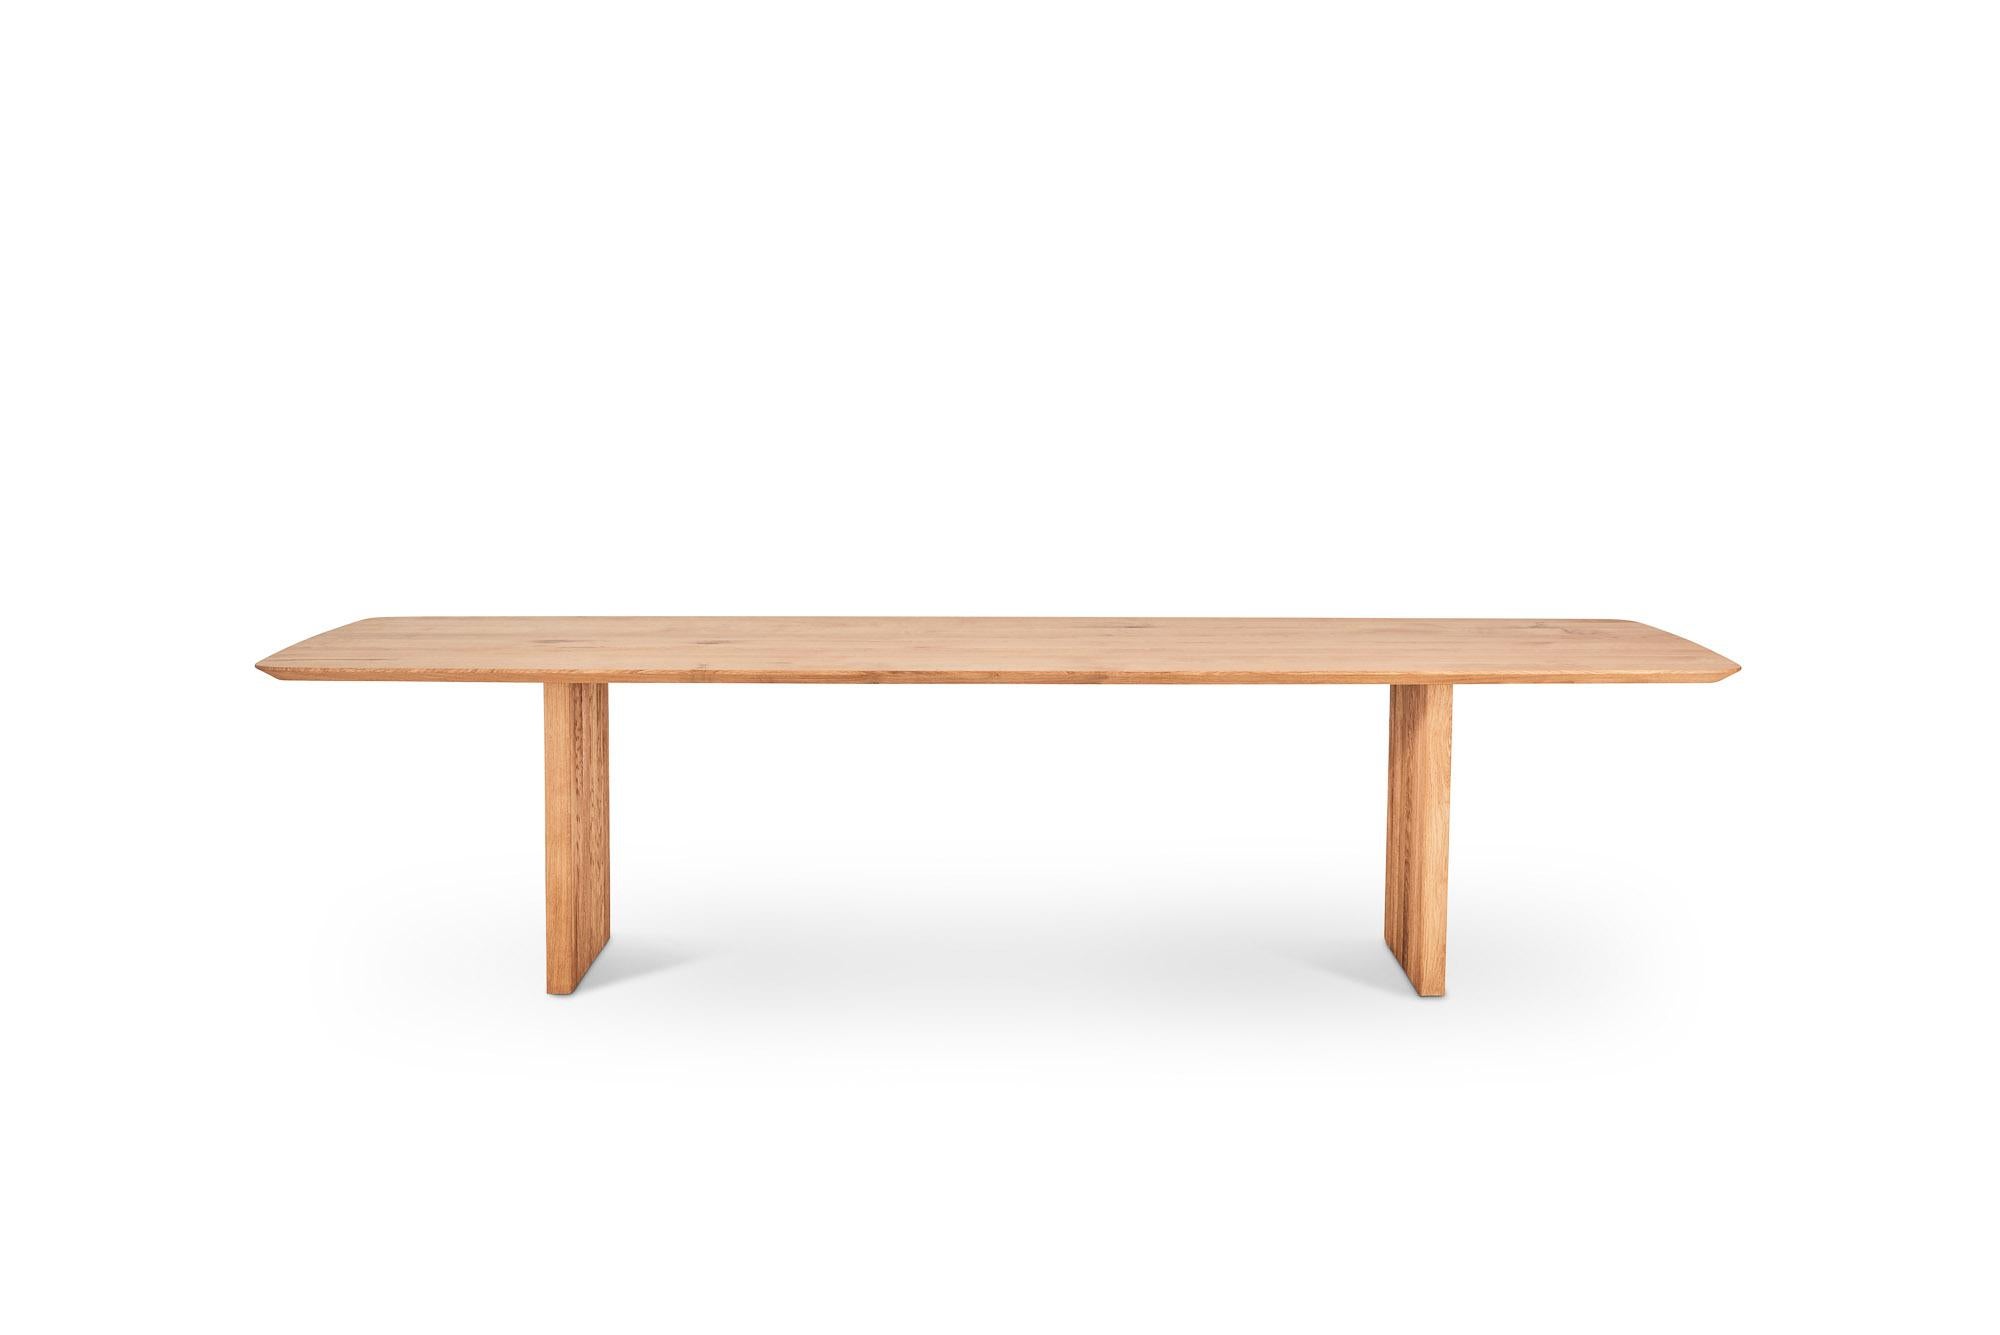 TEN dining table, rectangular, 240cm
Solid wood tabletop and legs. Handmade in Denmark.

Height: 72 or 74 cm

Tabletop dimensions:
– 200 x 95 cm
– 240 x 105 cm
– 270 x 105 cm
– 300 x 105 cm
– 340 x 105 cm
– 370 x 105 cm
– 400 x 105